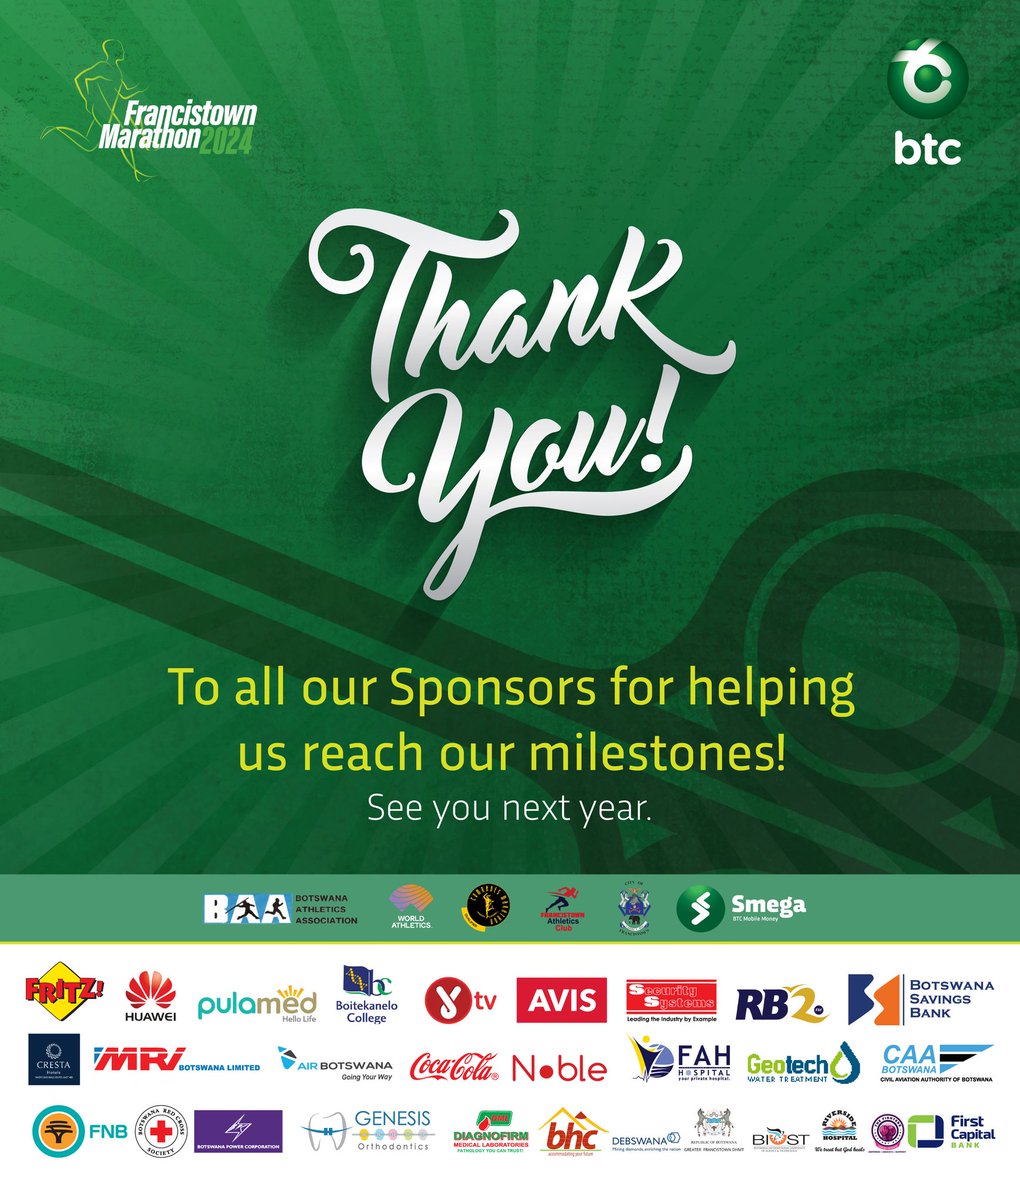 A heartfelt thank you to our incredible sponsors who made the  BTC Francistown Marathon 2024 a resounding success!

 Your unwavering support and commitment have been instrumental in making this event truly remarkable.

#BTCFrancistownMarathon
#MileStoneOfHope
#LiveConnected